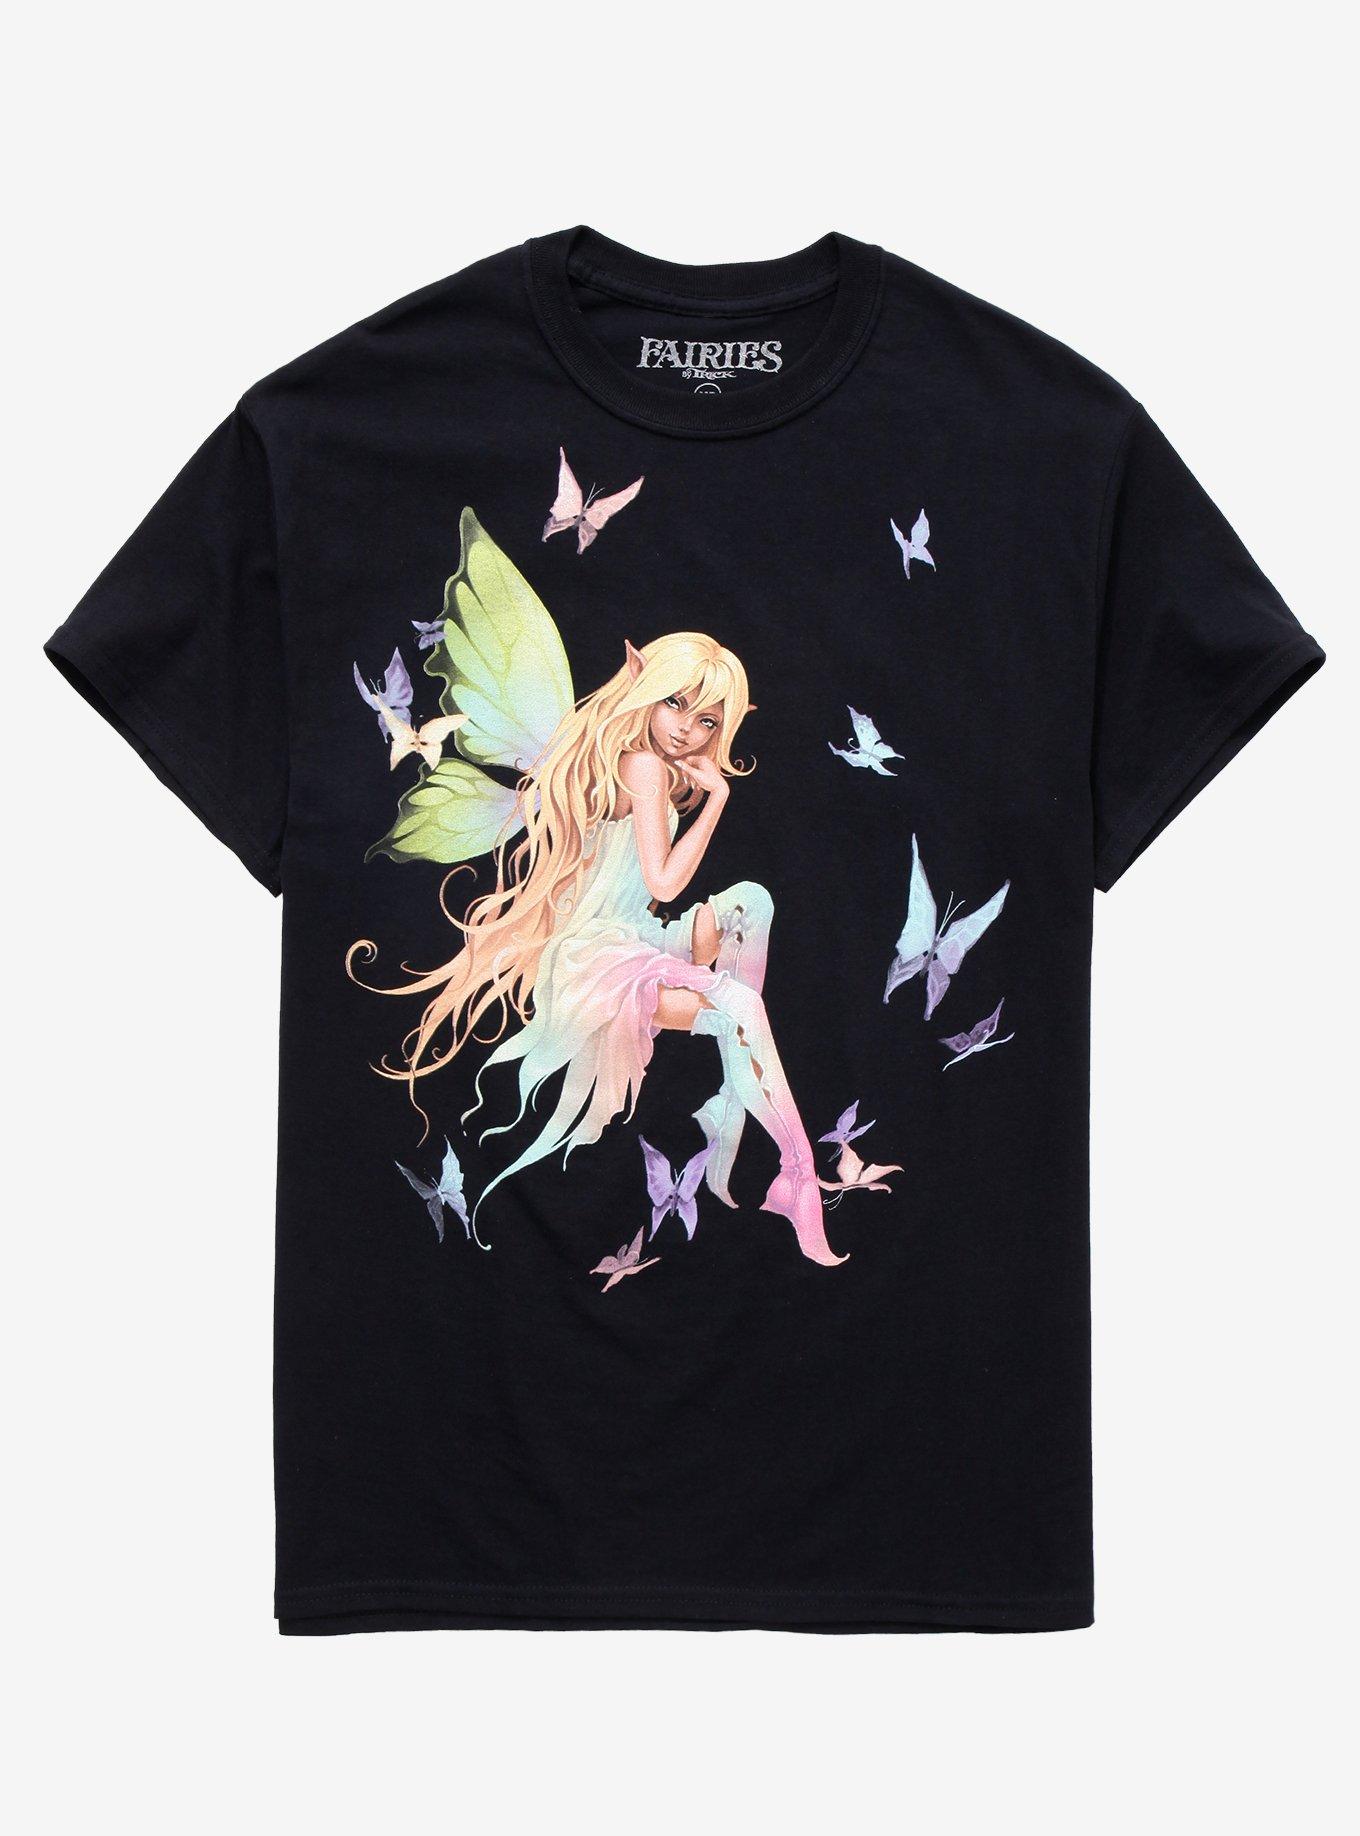 Fairies By Trick Hot Boyfriend T-Shirt Pastel Fairy Butterfly Fit Topic Girls 